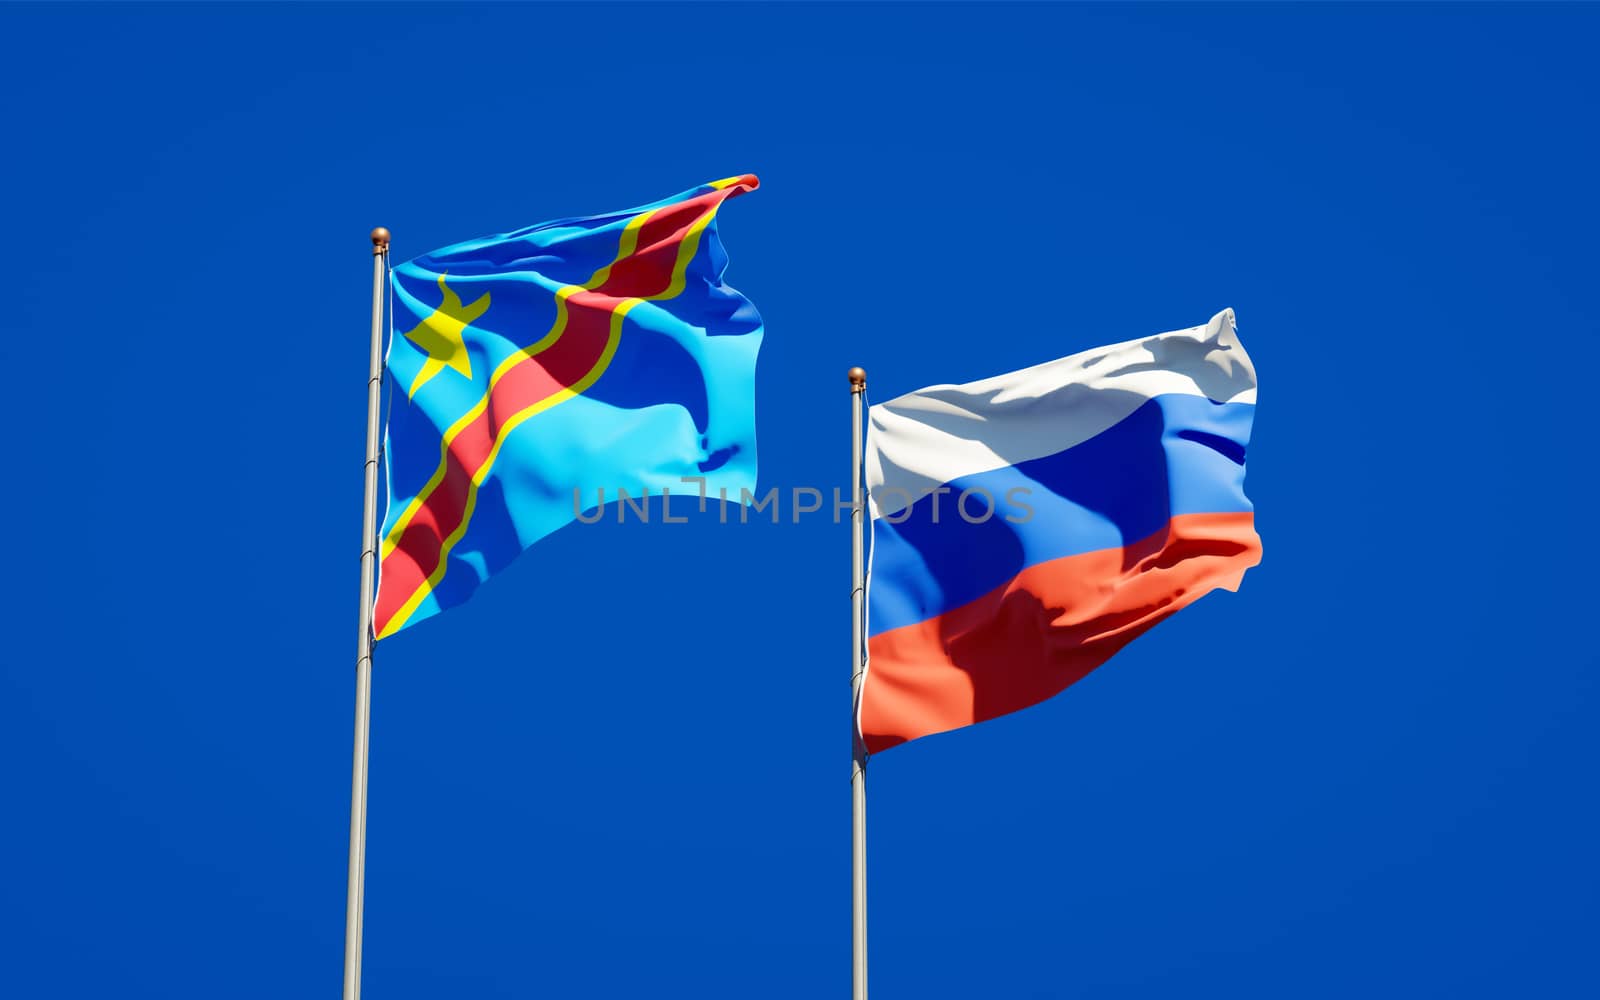 Beautiful national state flags of Russia and Congo together at the sky background. 3D artwork concept. 